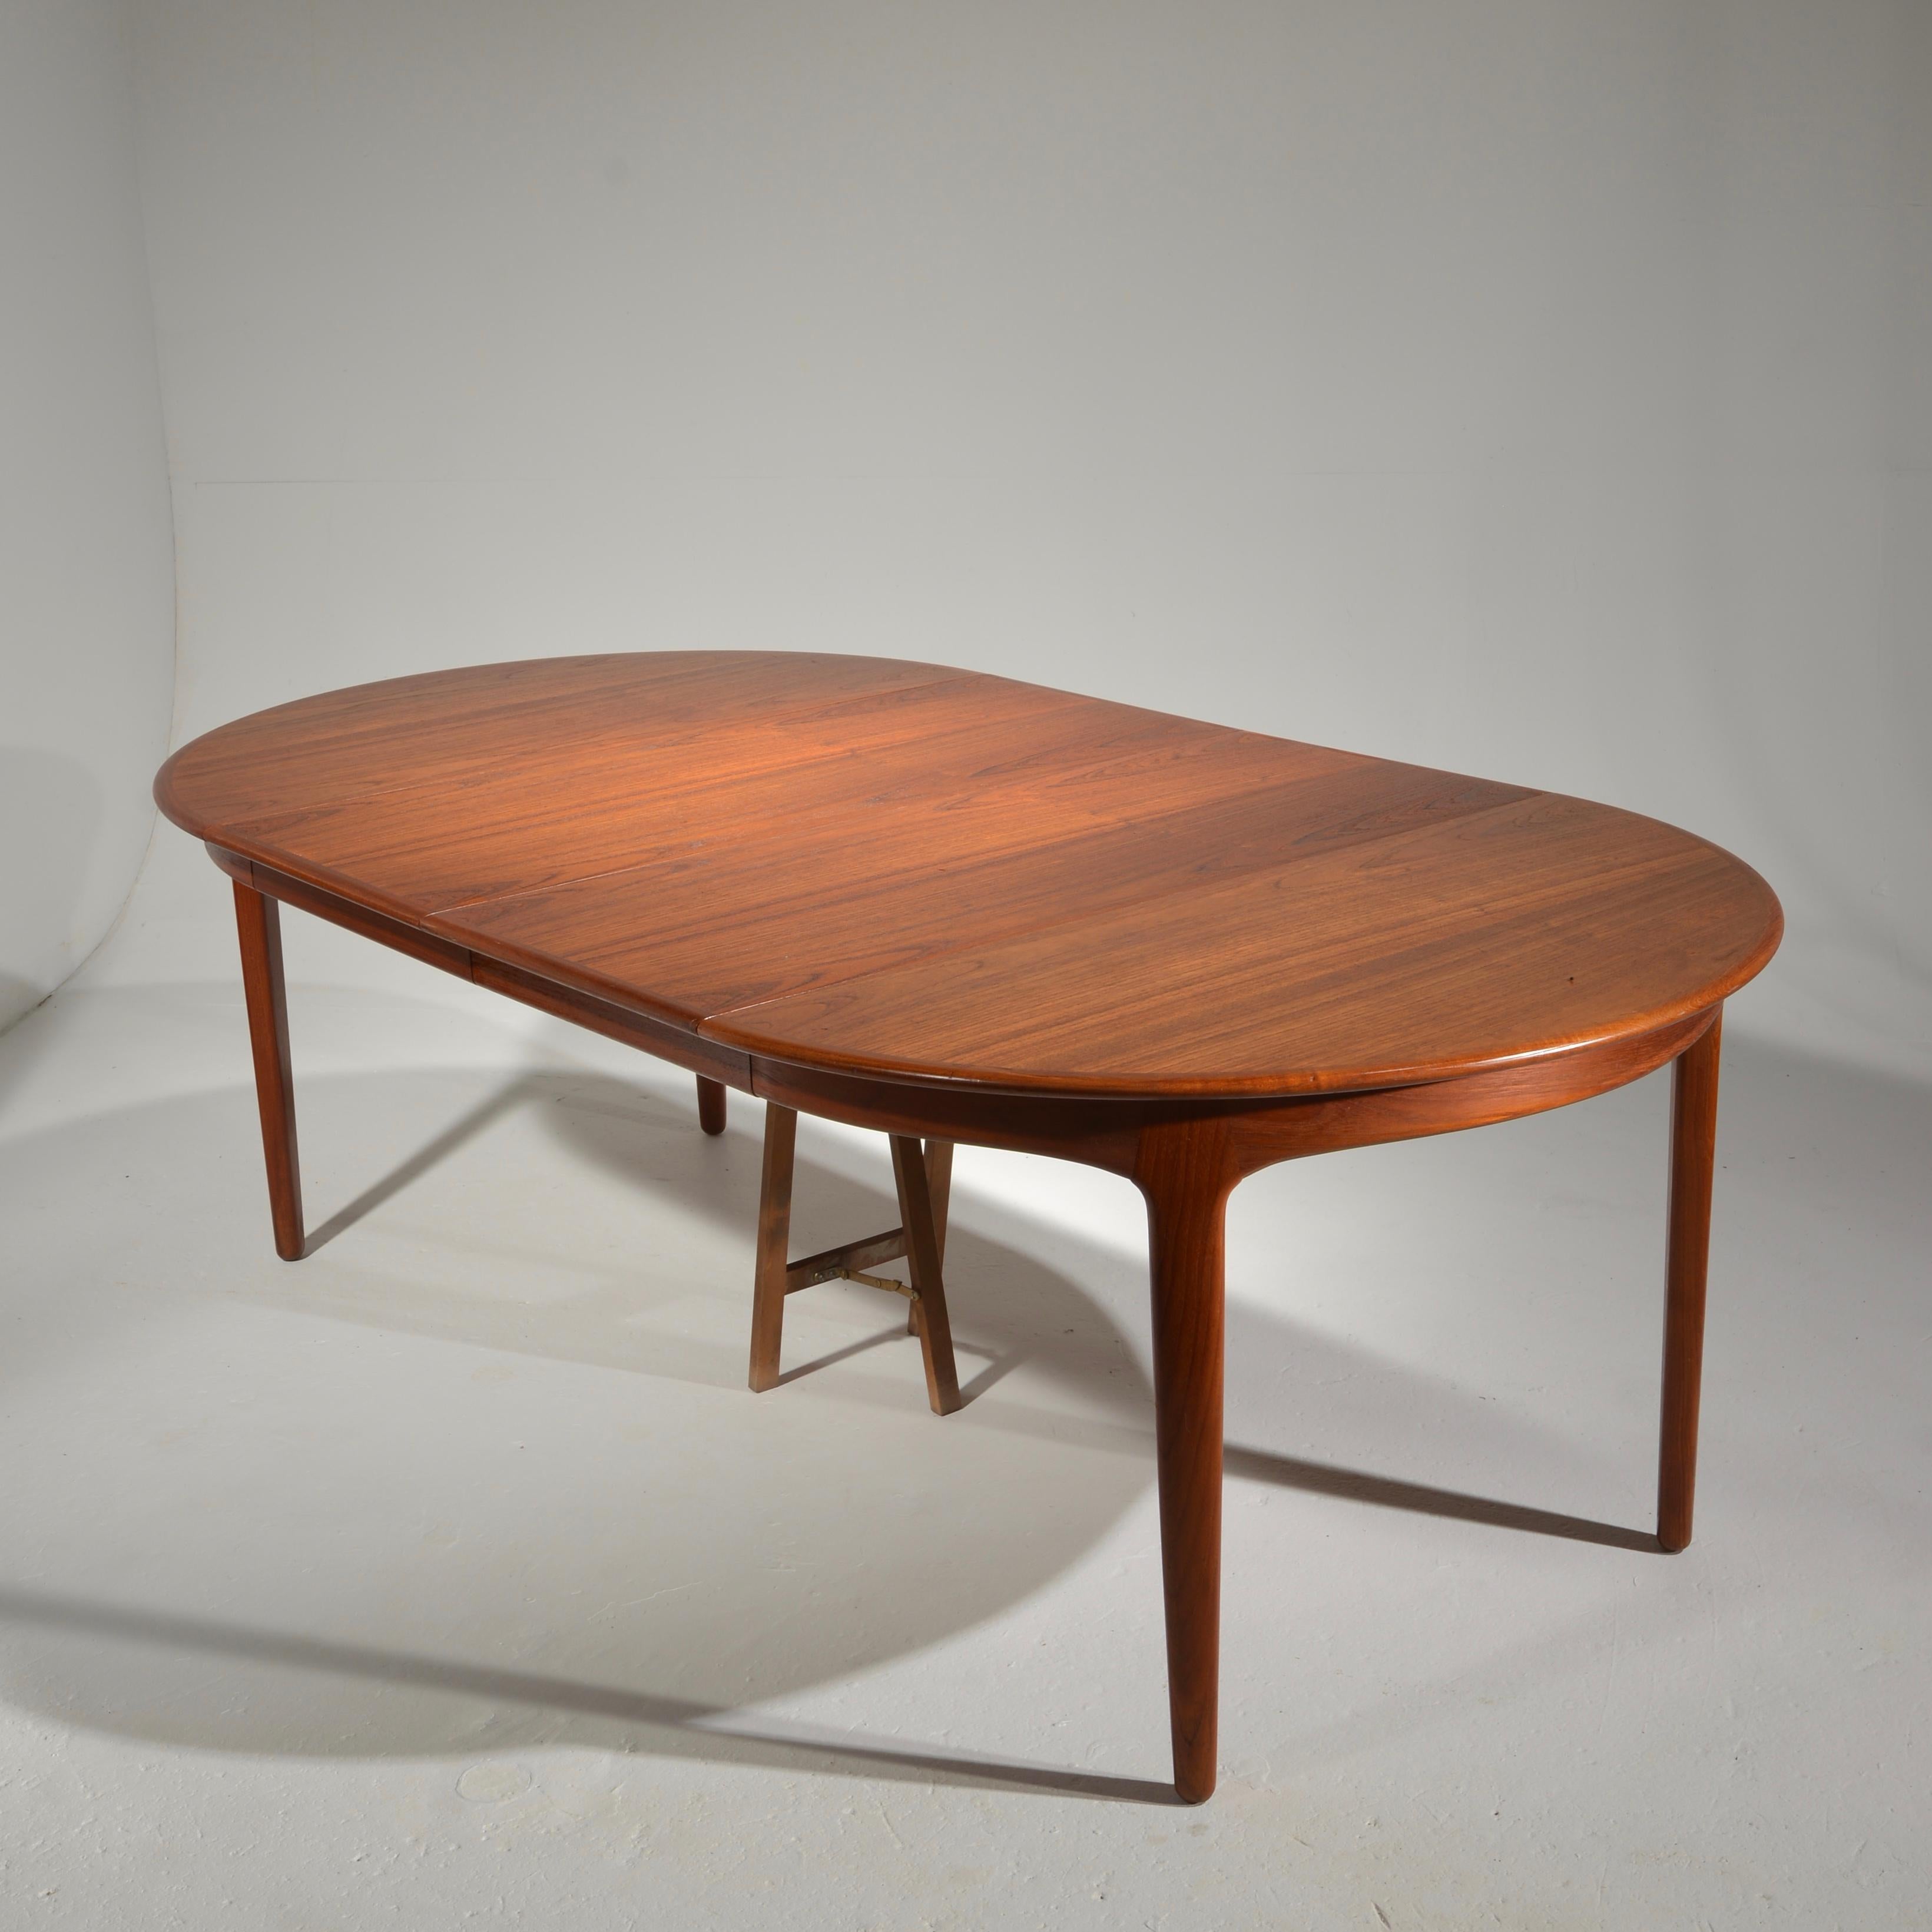 Extra Long Danish Teak Round Table with 4 Extensions by Henning Kjaernulf 1